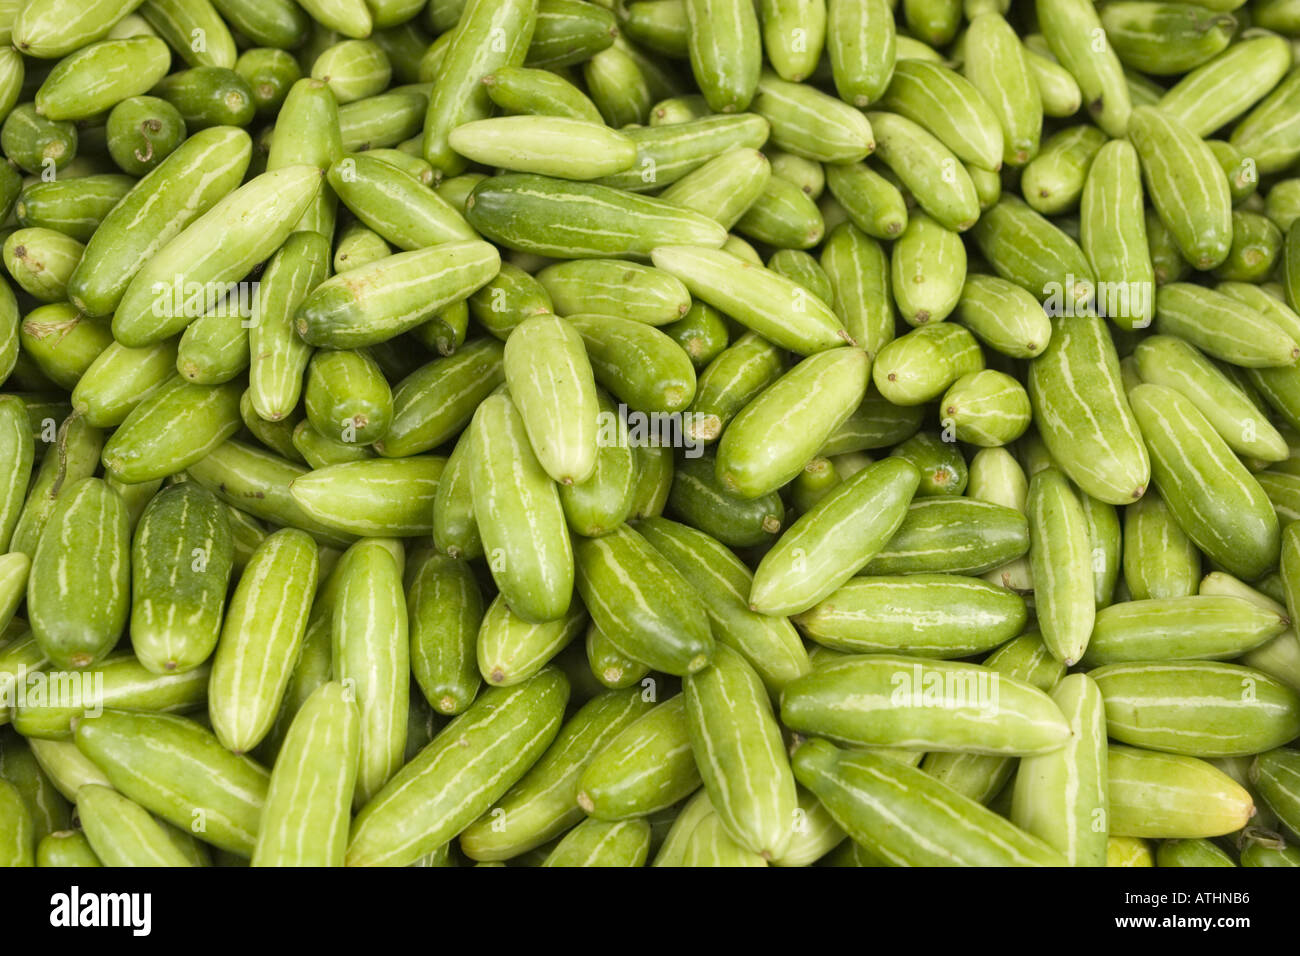 Tindora is Indian cucumber used in variety of dishes including curry at Indian grocery store Queens New York NYC Stock Photo